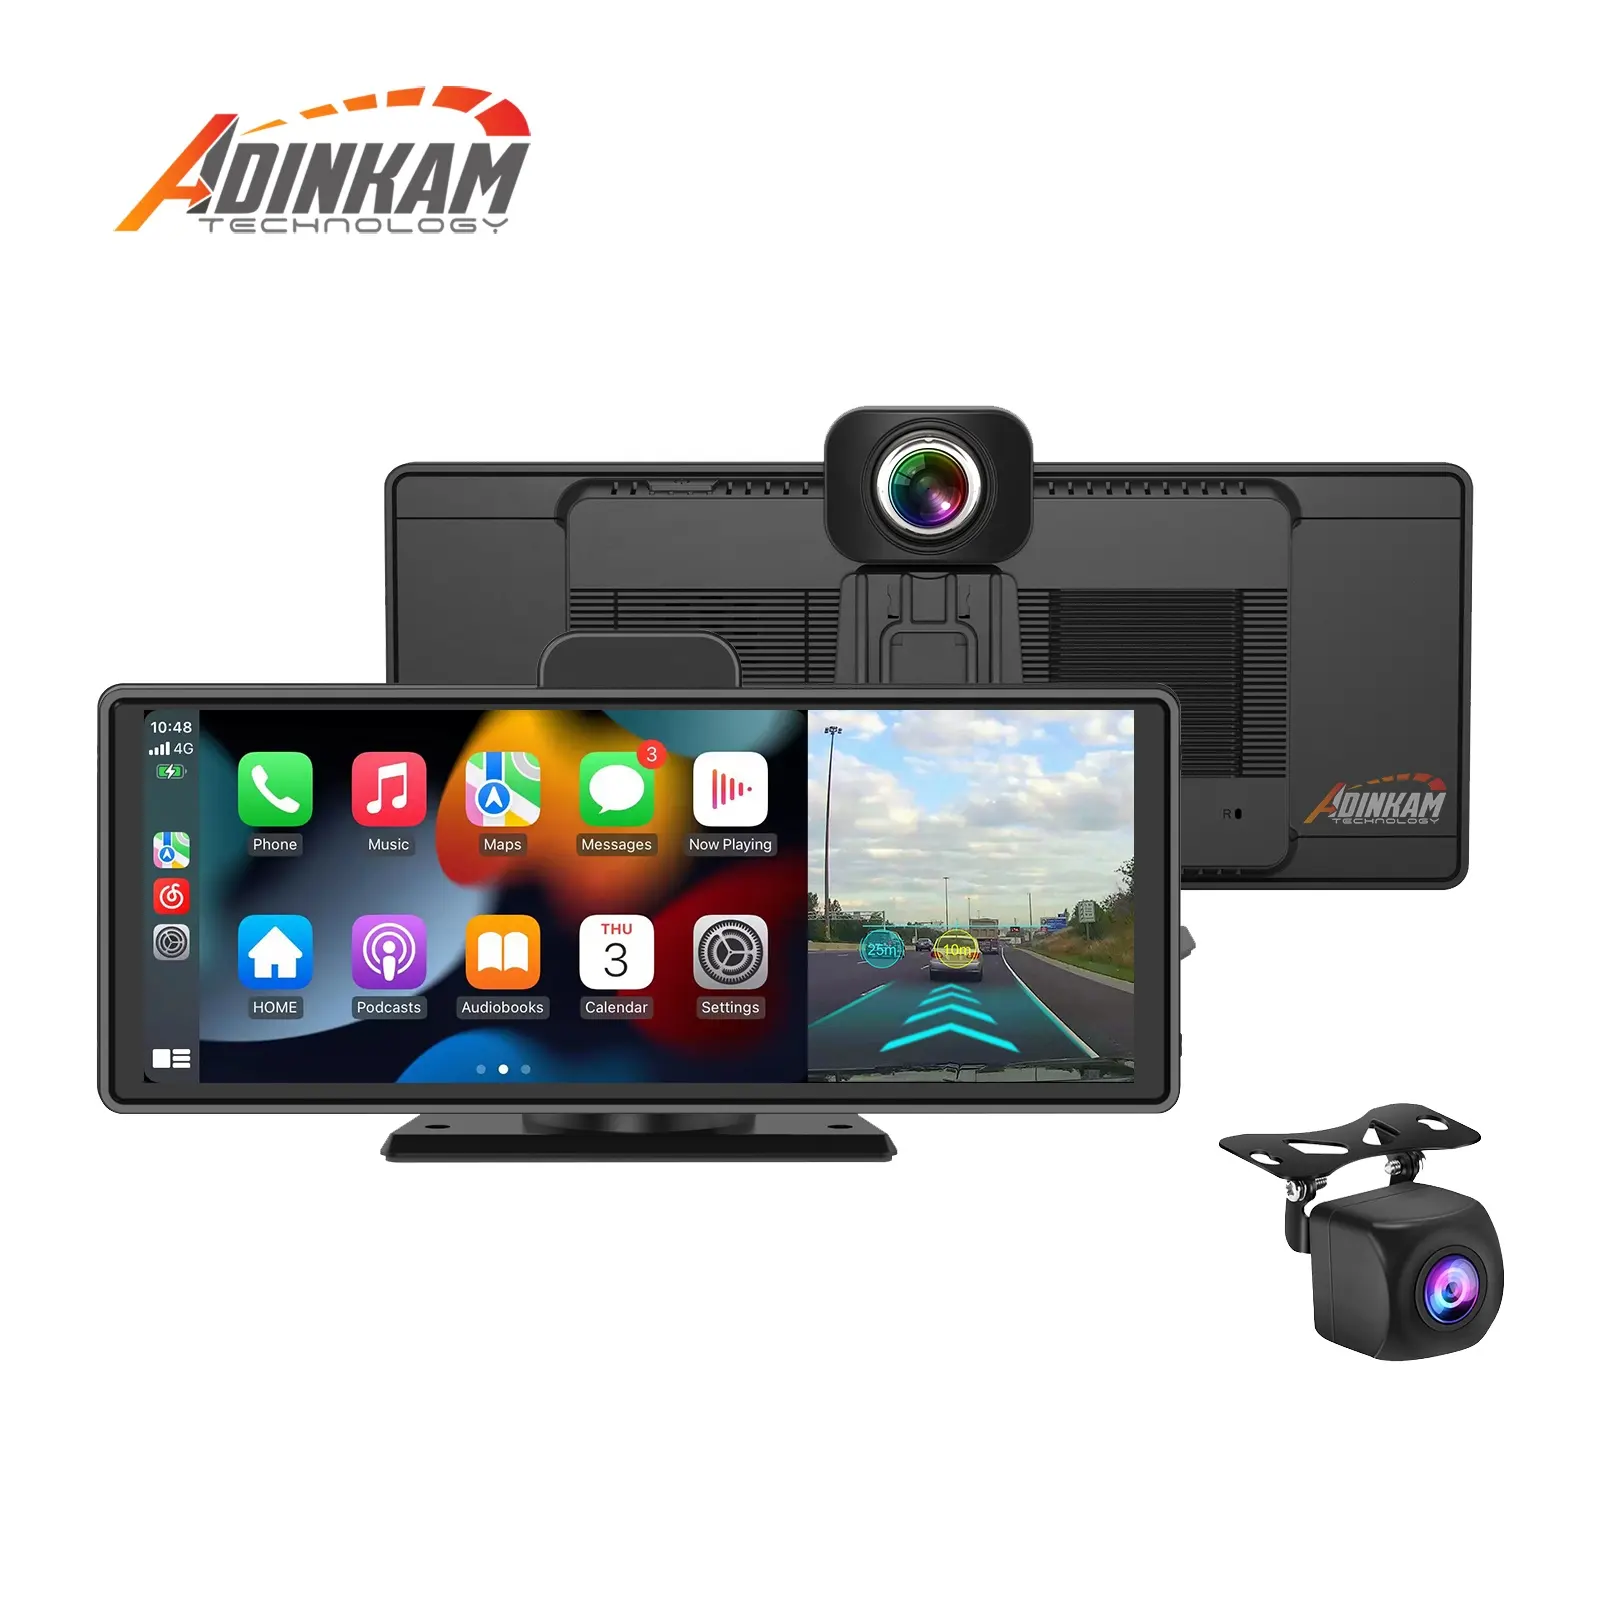 ADINKAM 10.26" Wireless Carplay Android Auto H.265 ADAS AUX 4K Dash Cam Front and Rear Portable Car Stereo